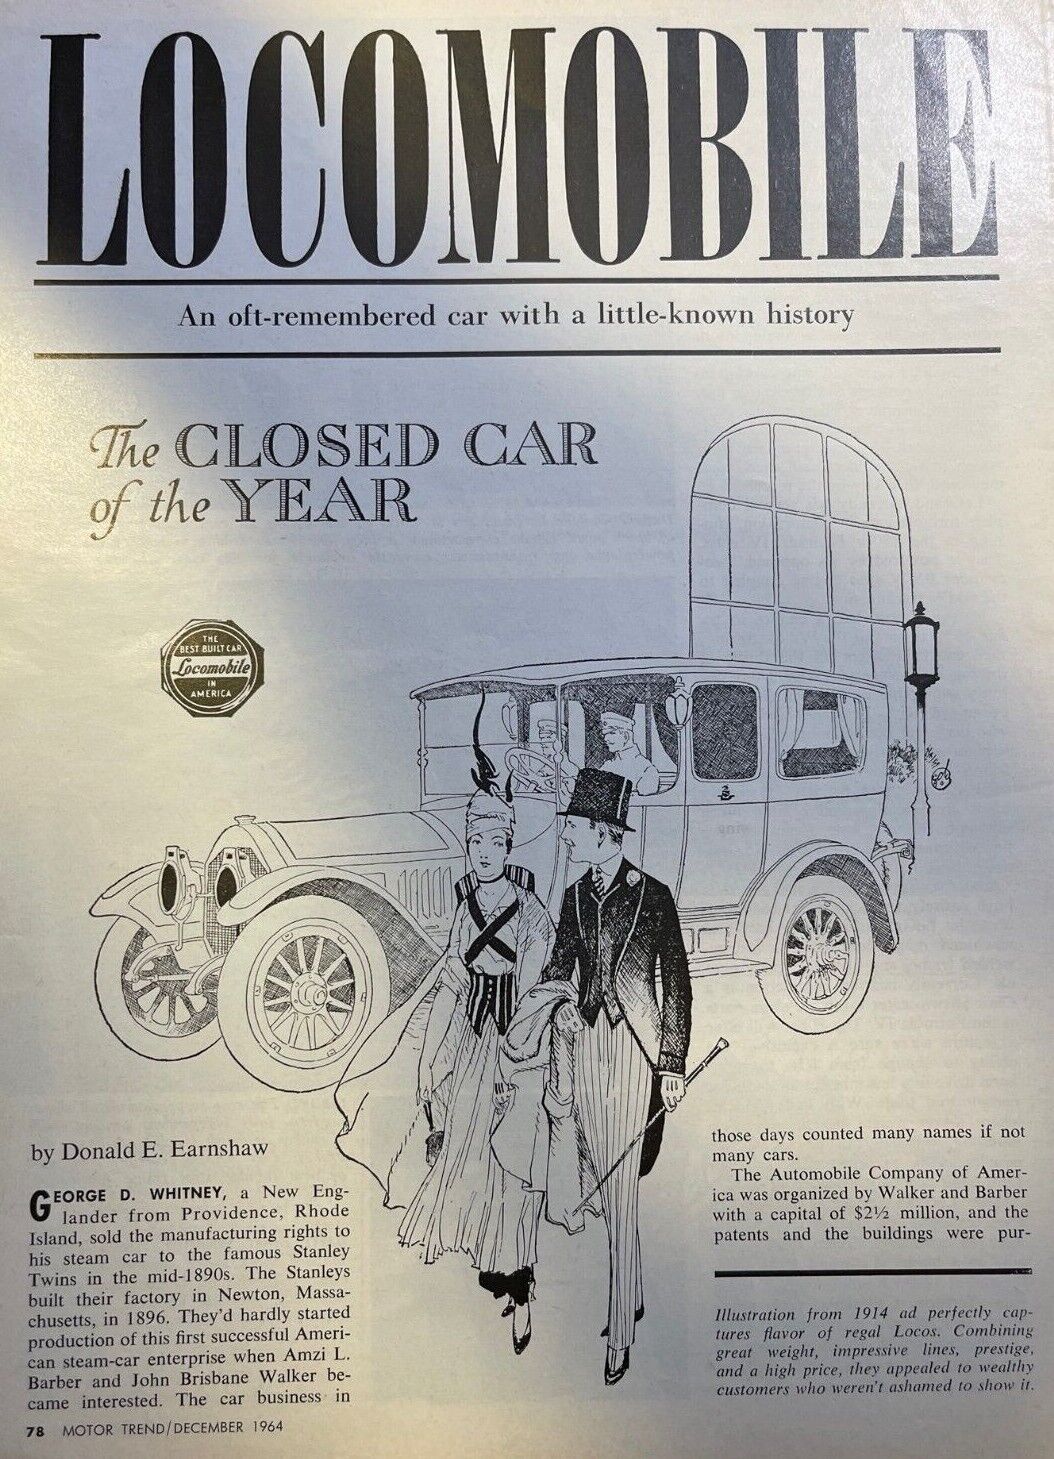 1964 History of the Locomobile illustrated